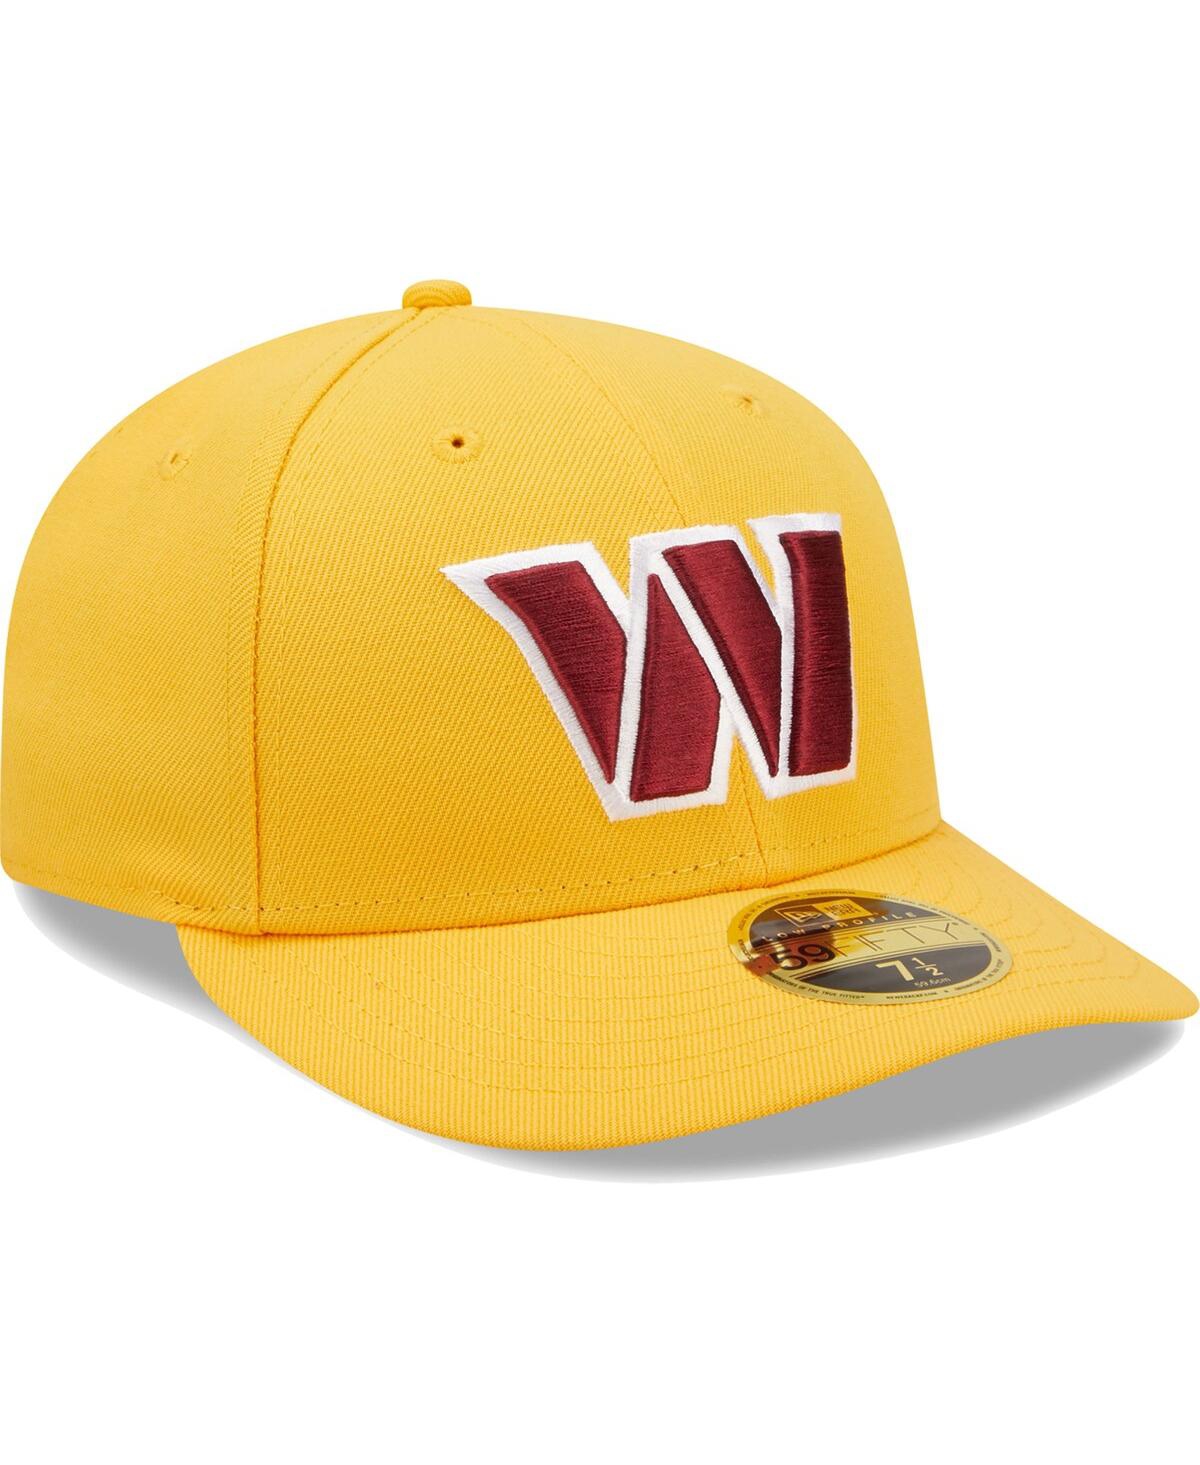 Shop New Era Men's  Gold Washington Commanders Omaha Low Profile 59fifty Fitted Hat